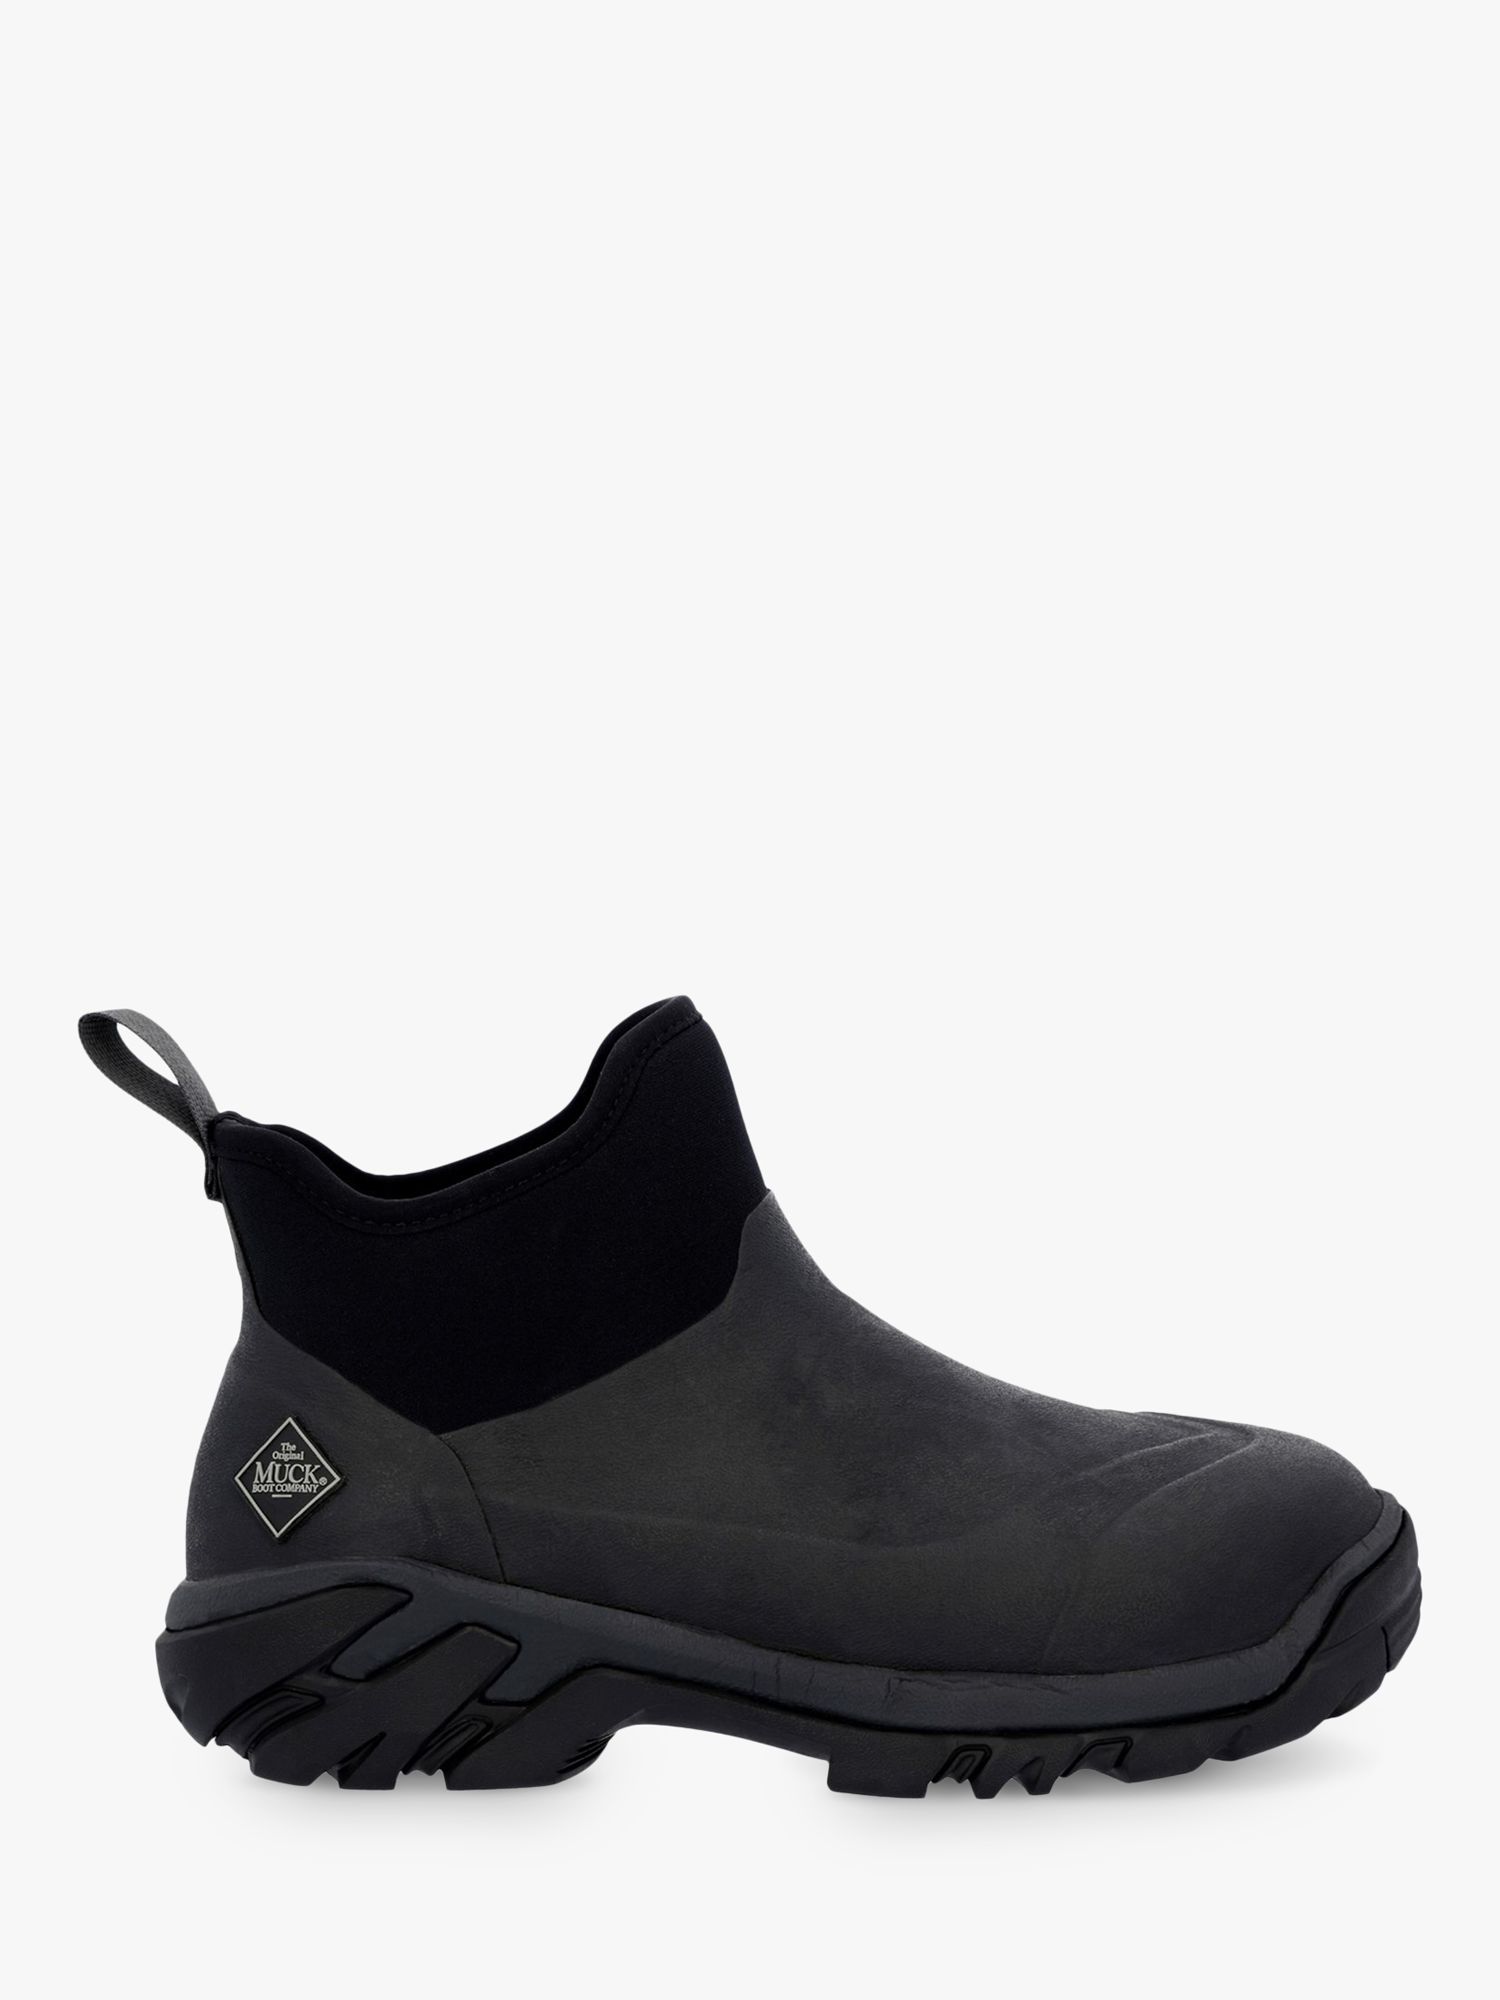 Muck Woody Sport Rubber Boots, Black at John Lewis & Partners